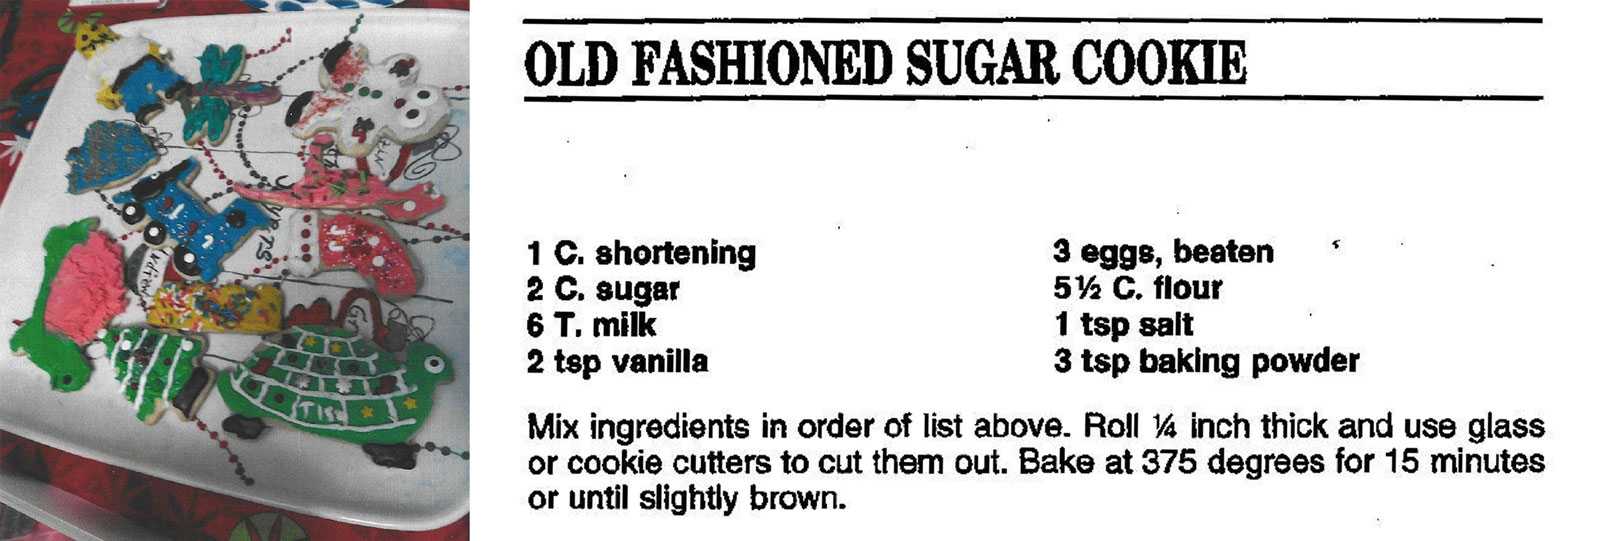 A photo of an old fashioned recipe and directions to make sugar cookies.